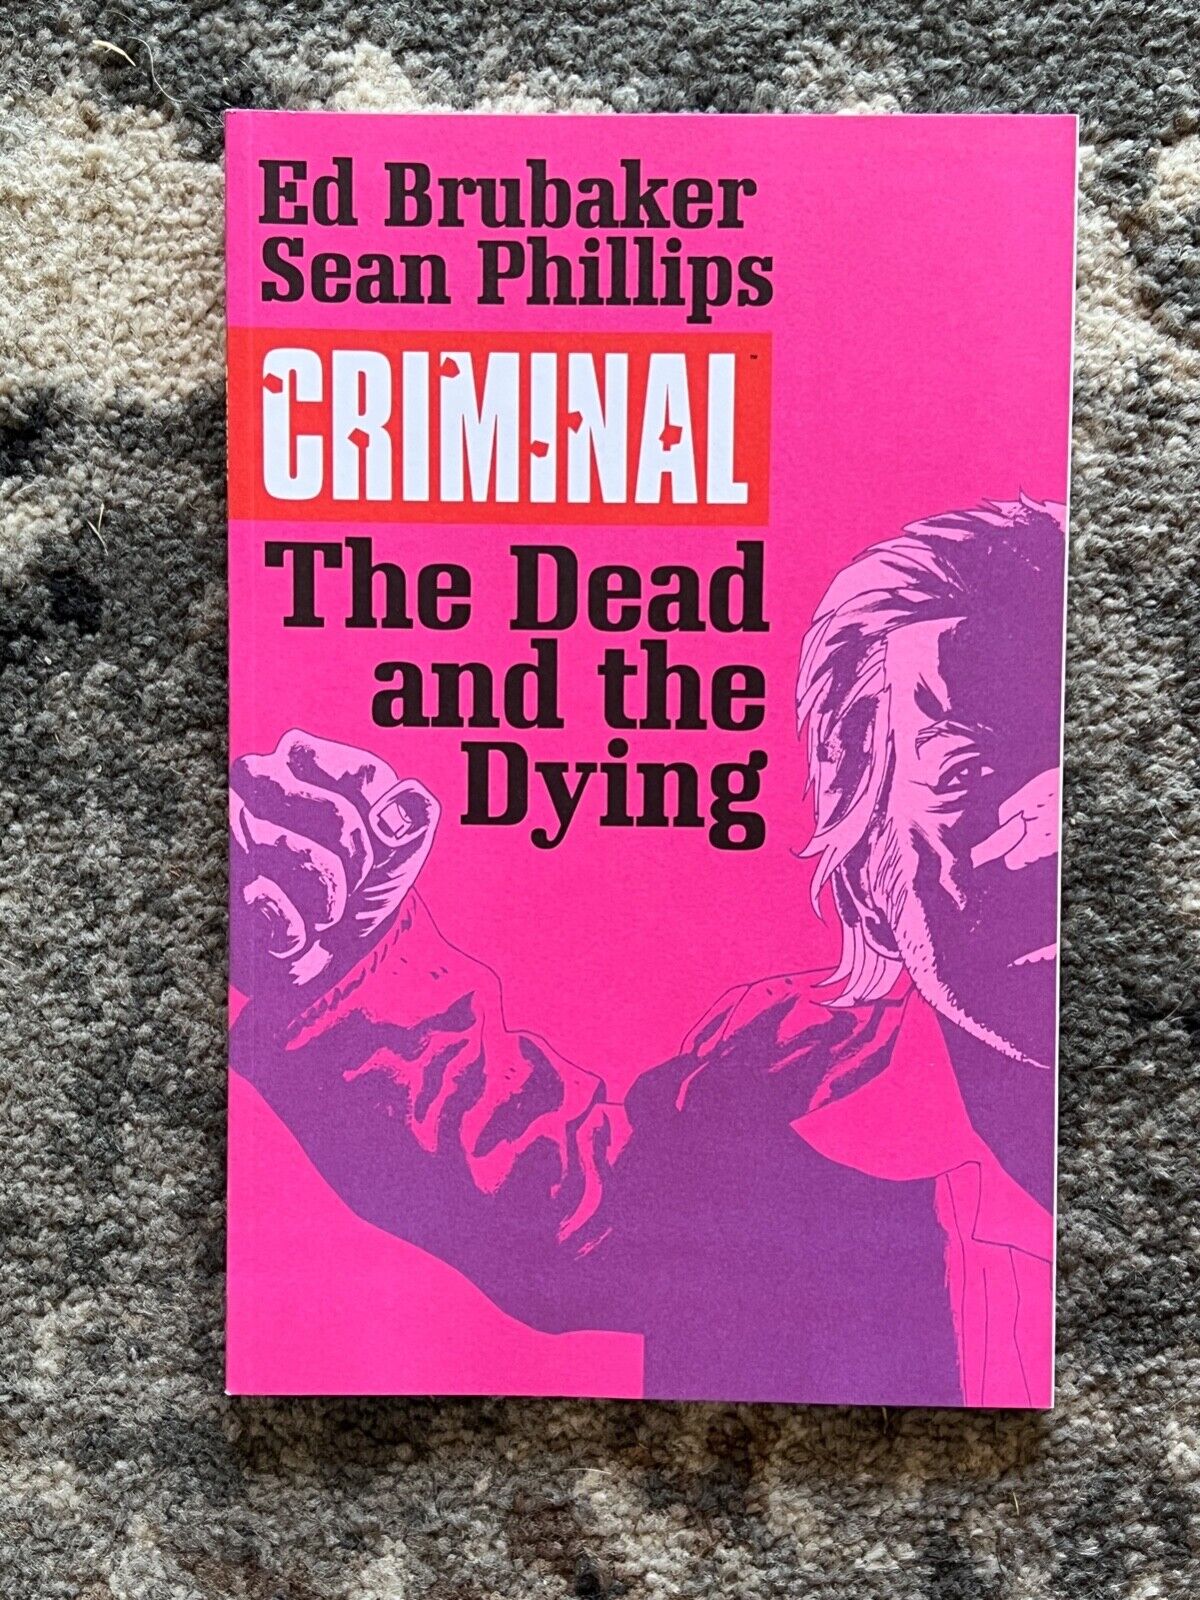 Criminal Vol. 3 : The Dead and the Dying by Ed Brubaker (2015, Trade Paperback) 